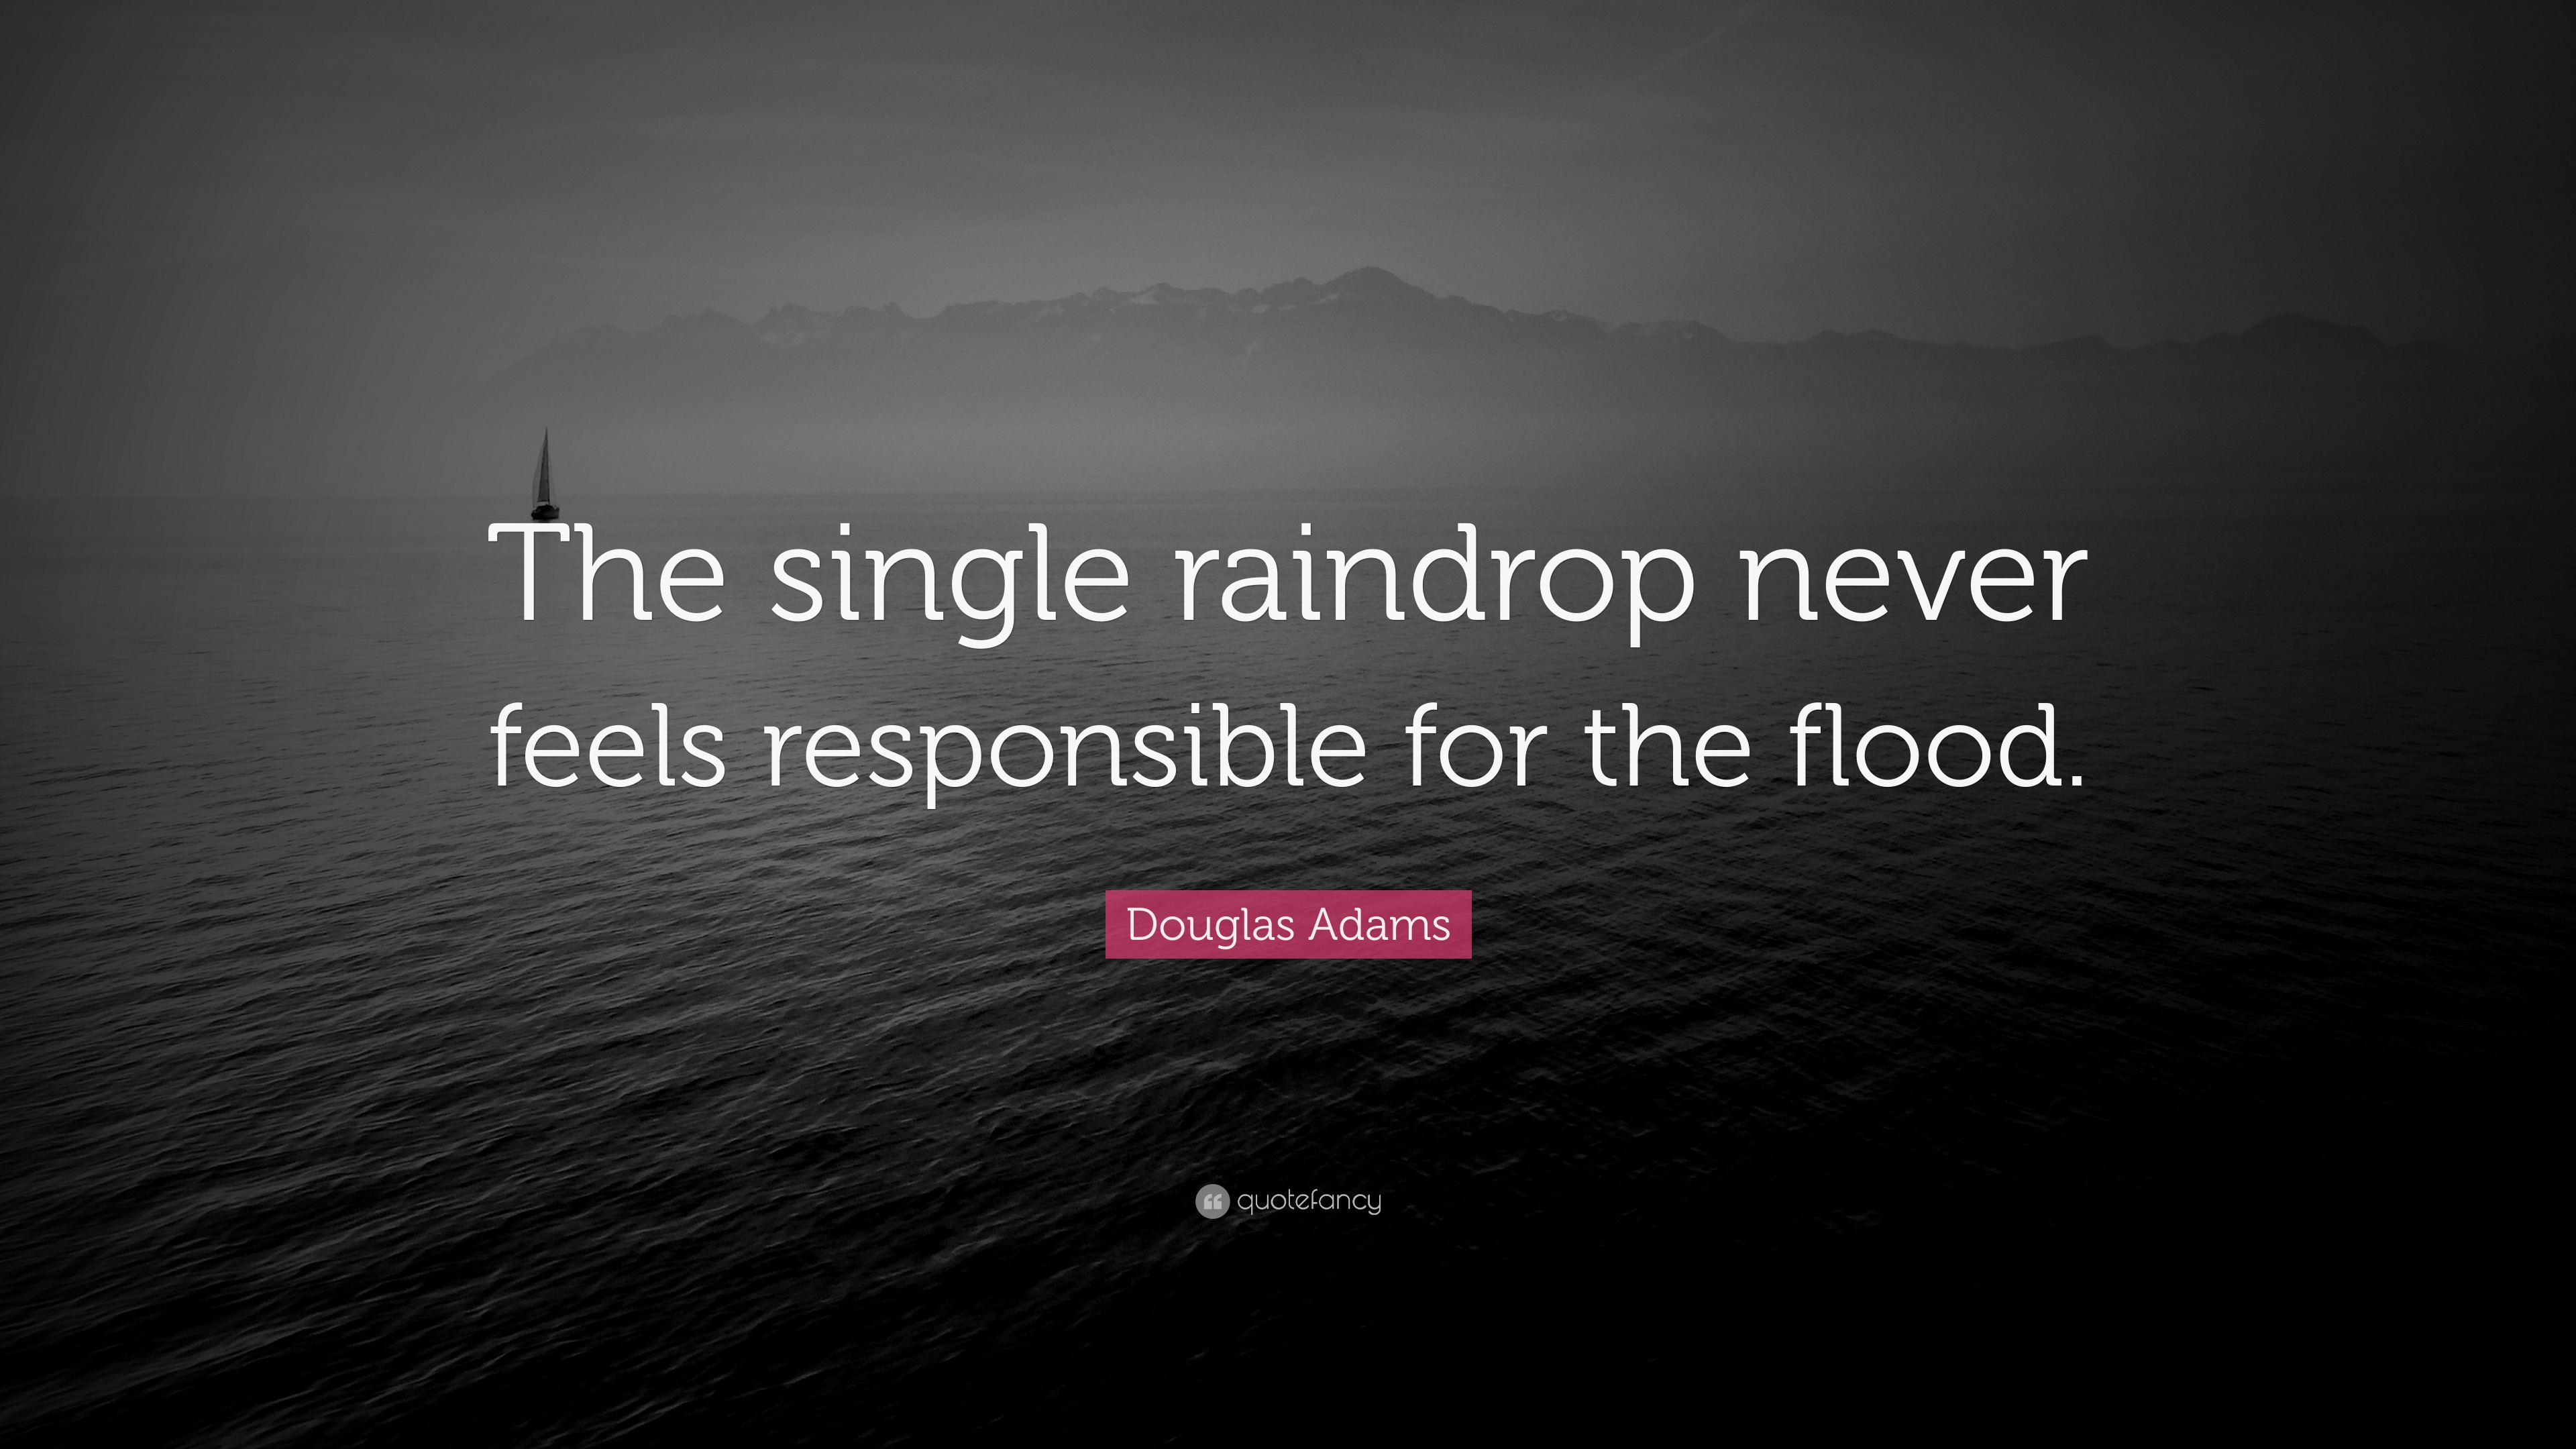 The single raindrop never feels responsible for the flood